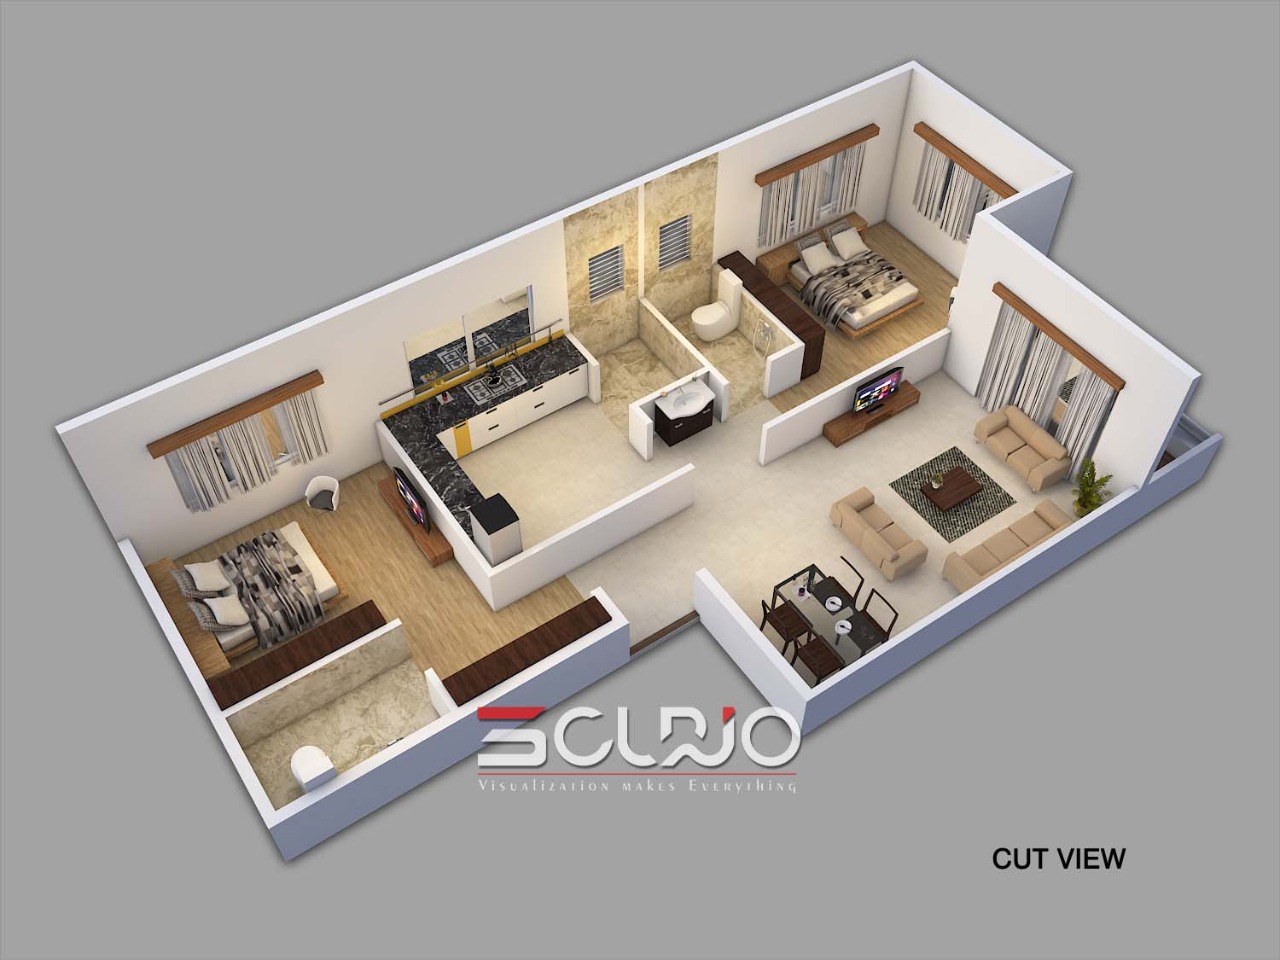 cut view section in nashik, cut view section for interior, interiro cut view section, bungalow cut view section